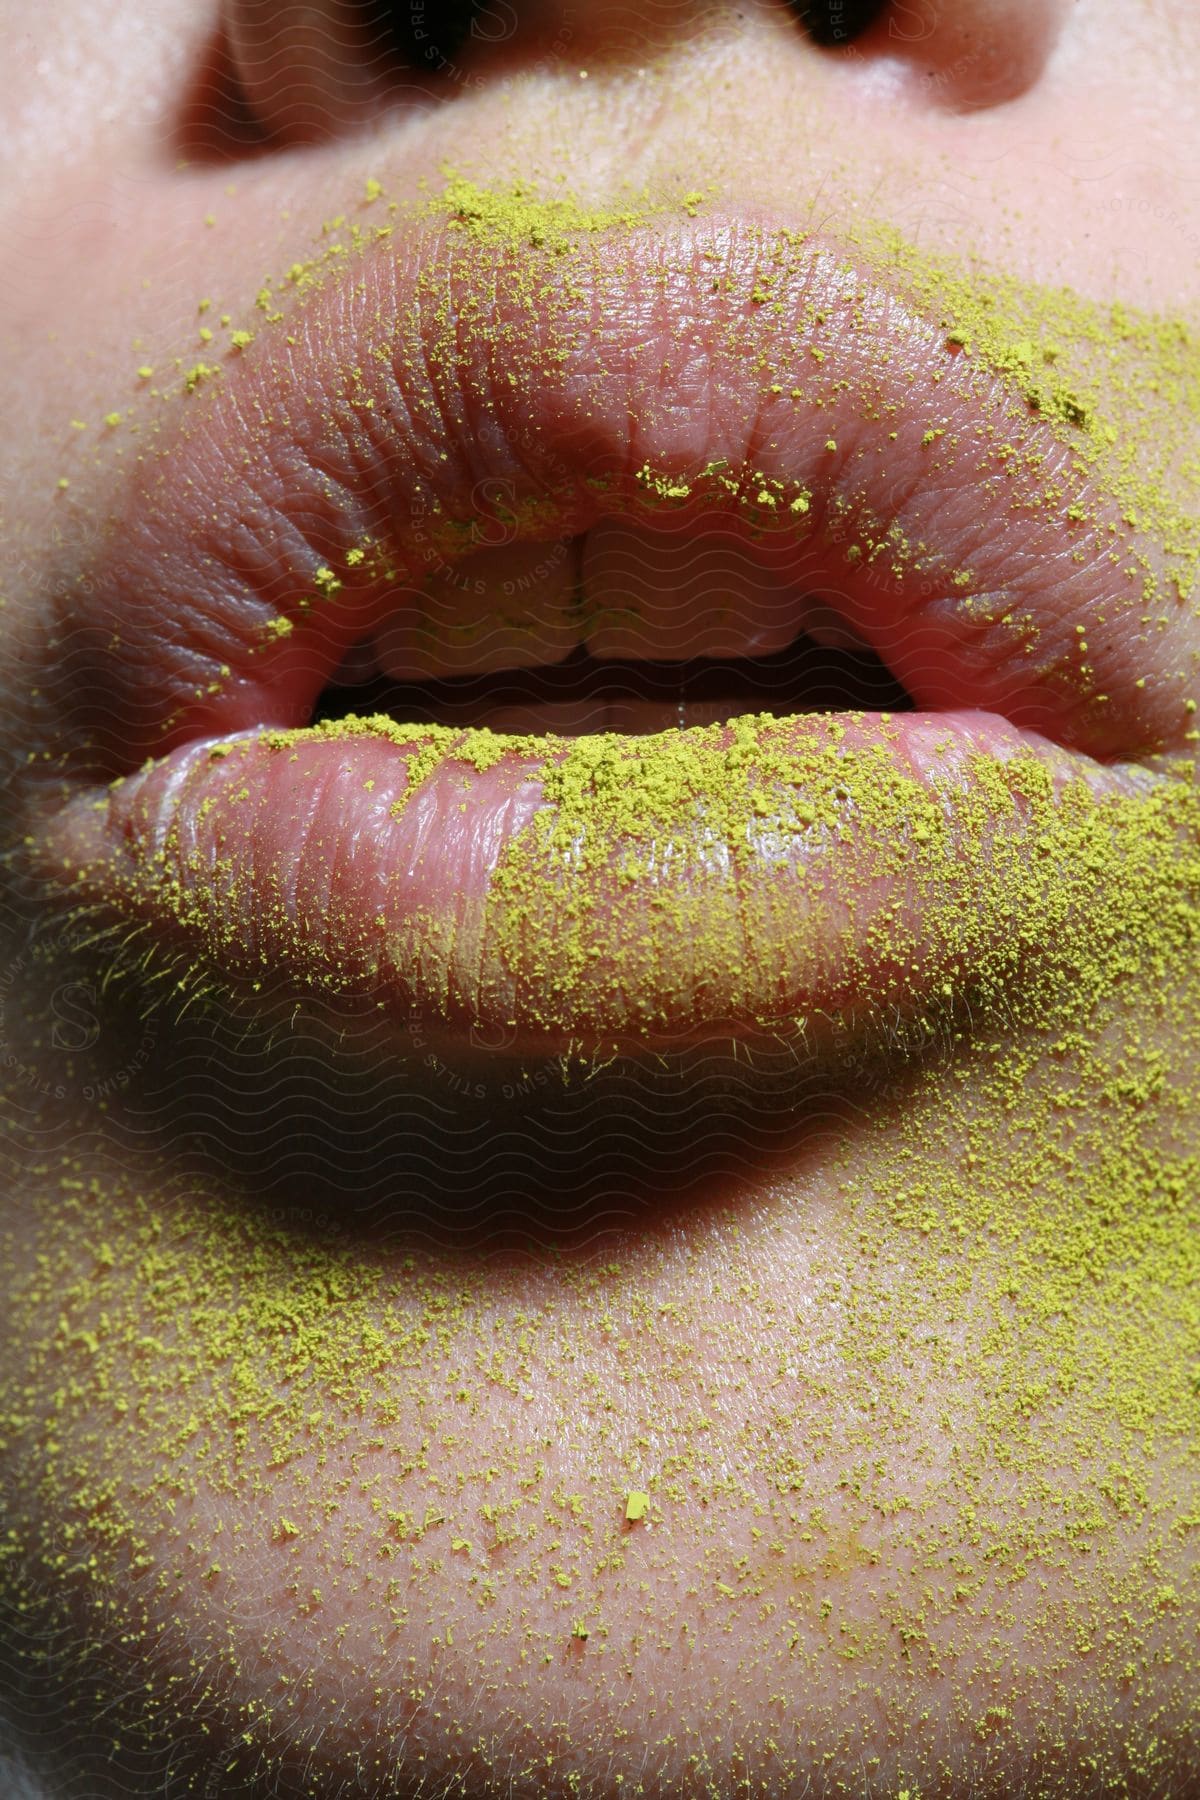 A woman's mouth, covered in yellow dust.